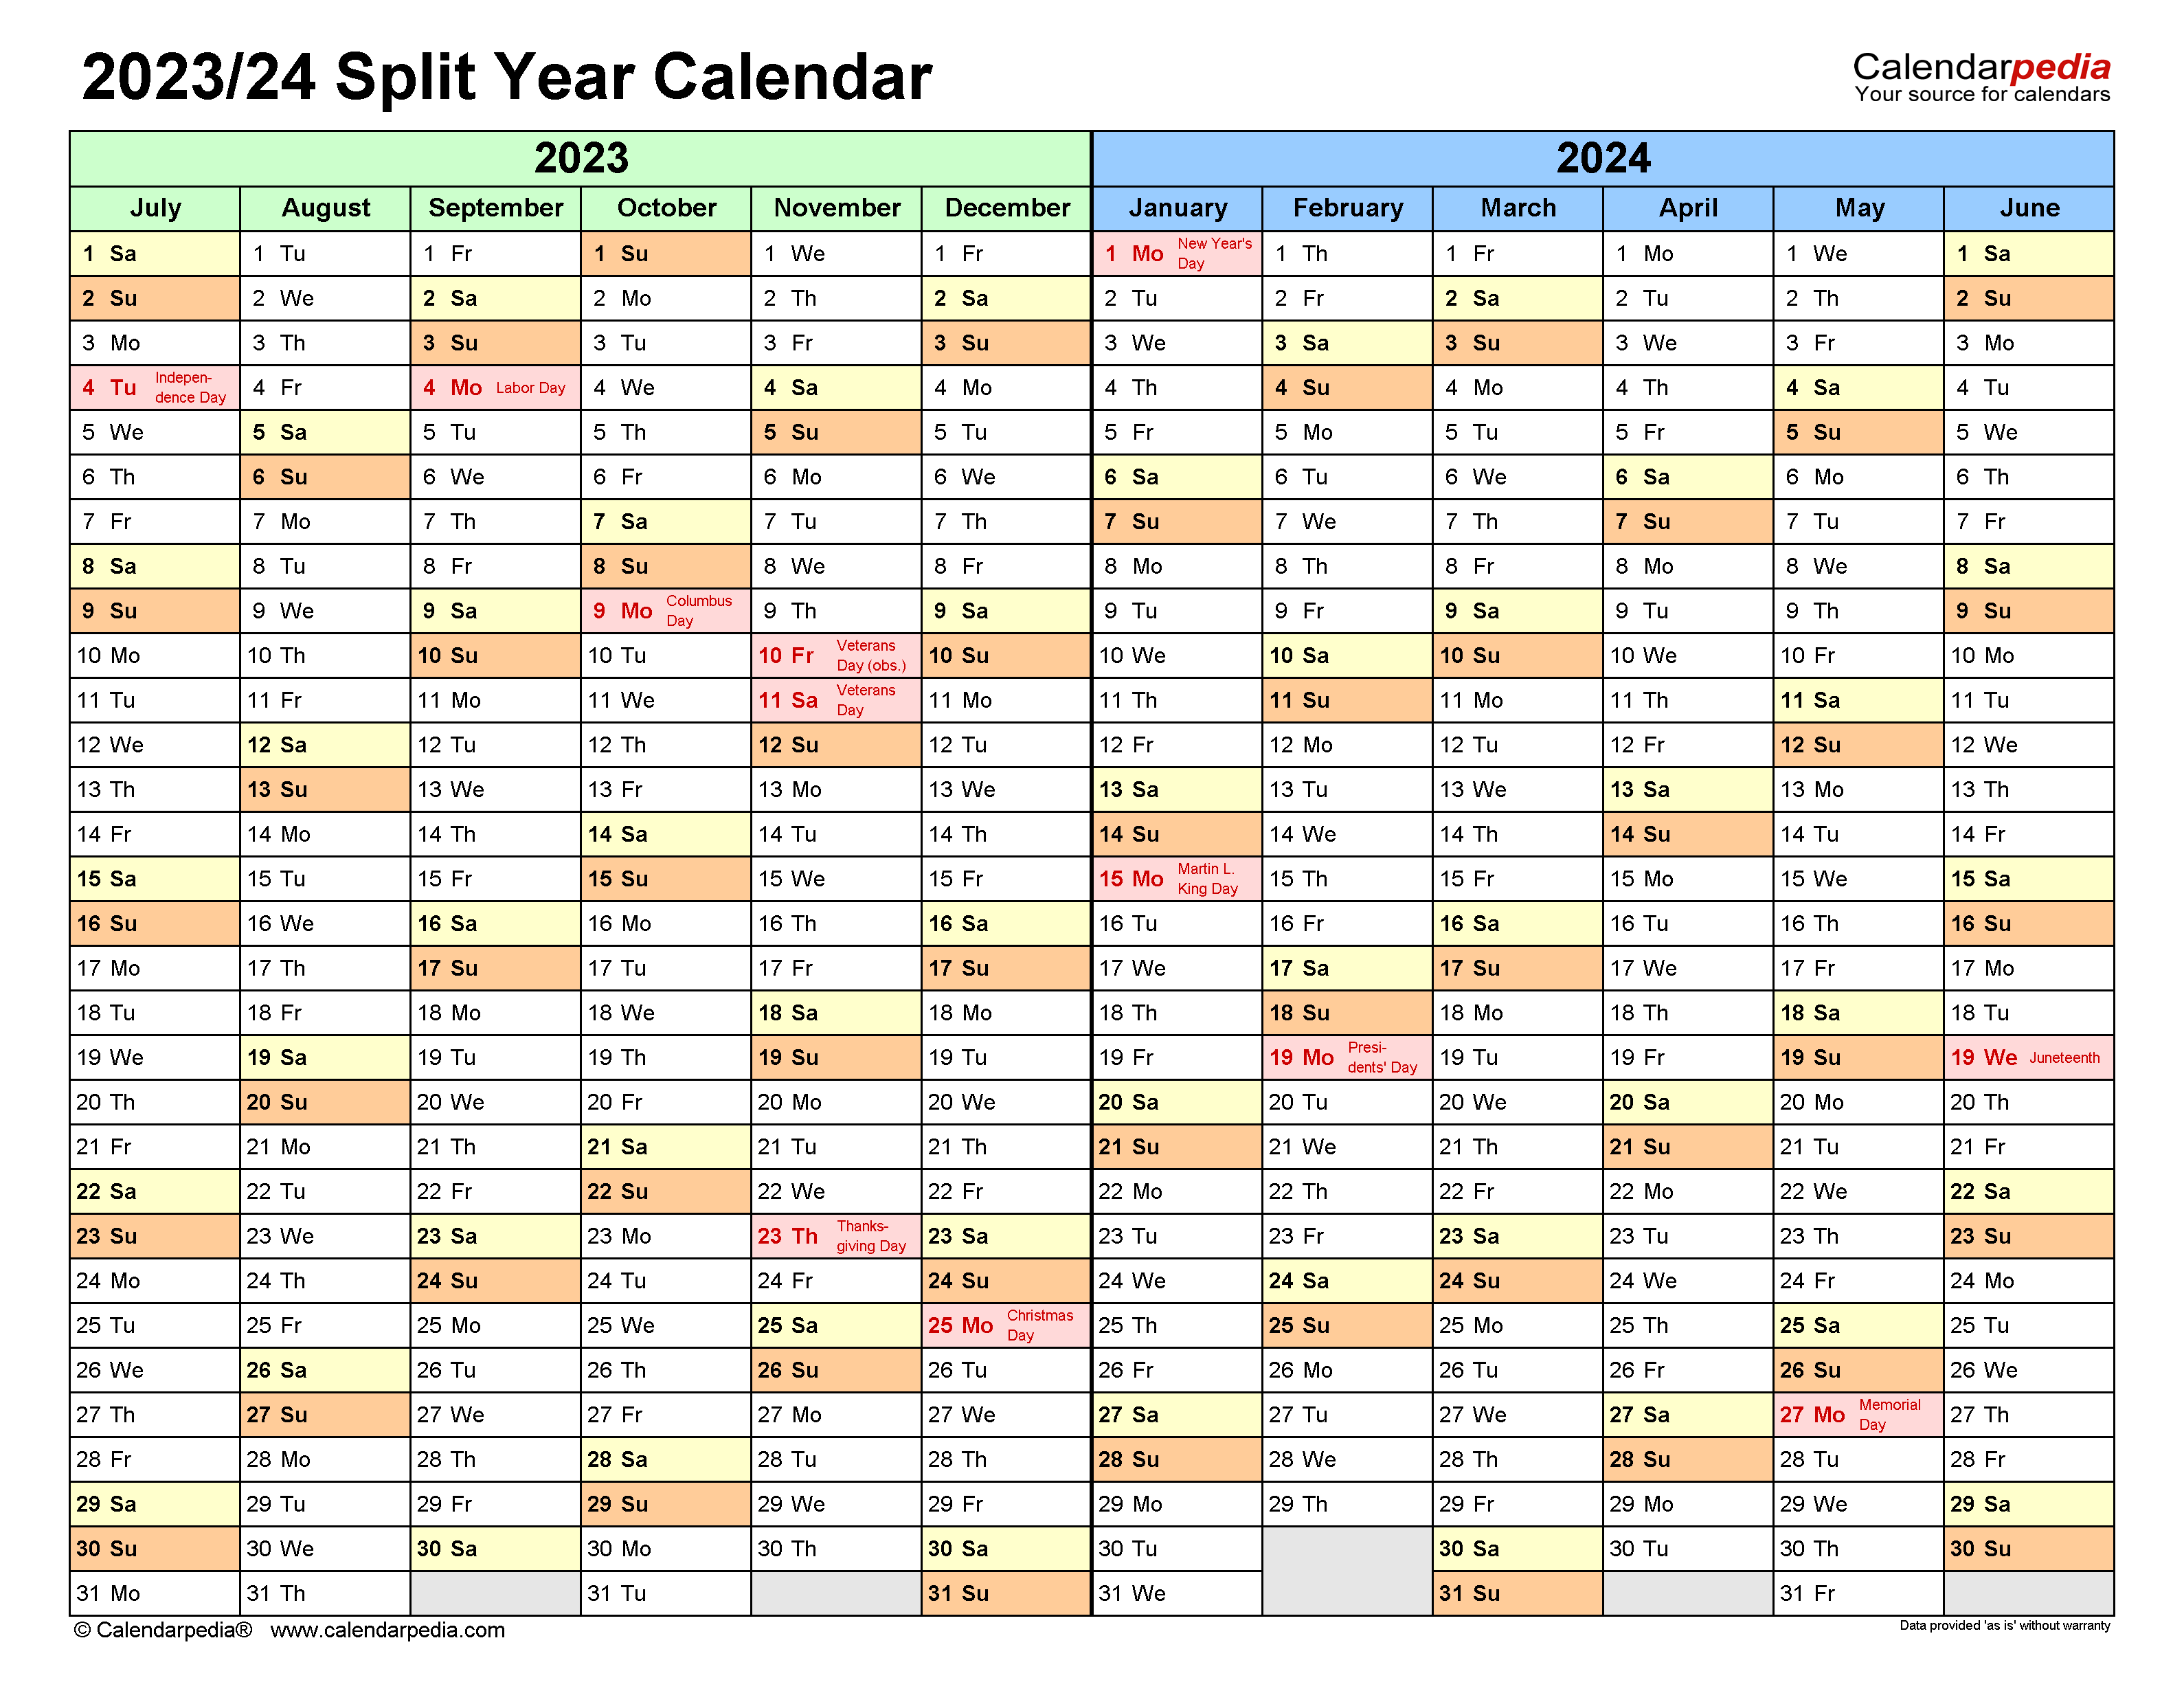 Split Year Calendars 2023/2024 (July To June) - Excel Templates in Calendar From July 2023 To July 2024